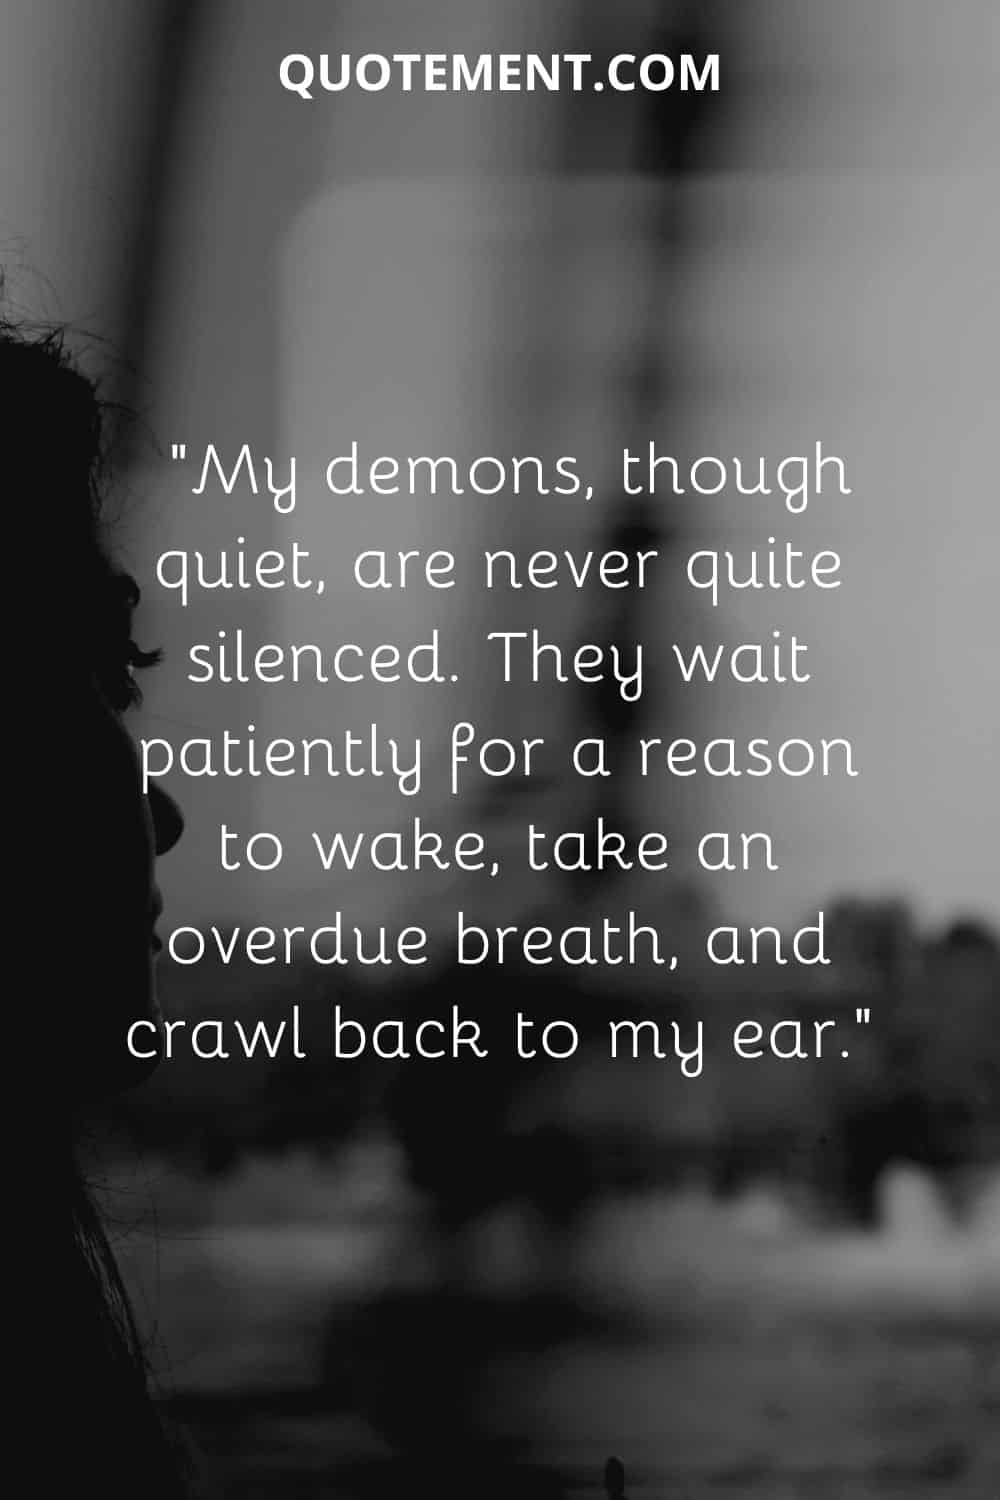 My demons, though quiet, are never quite silenced